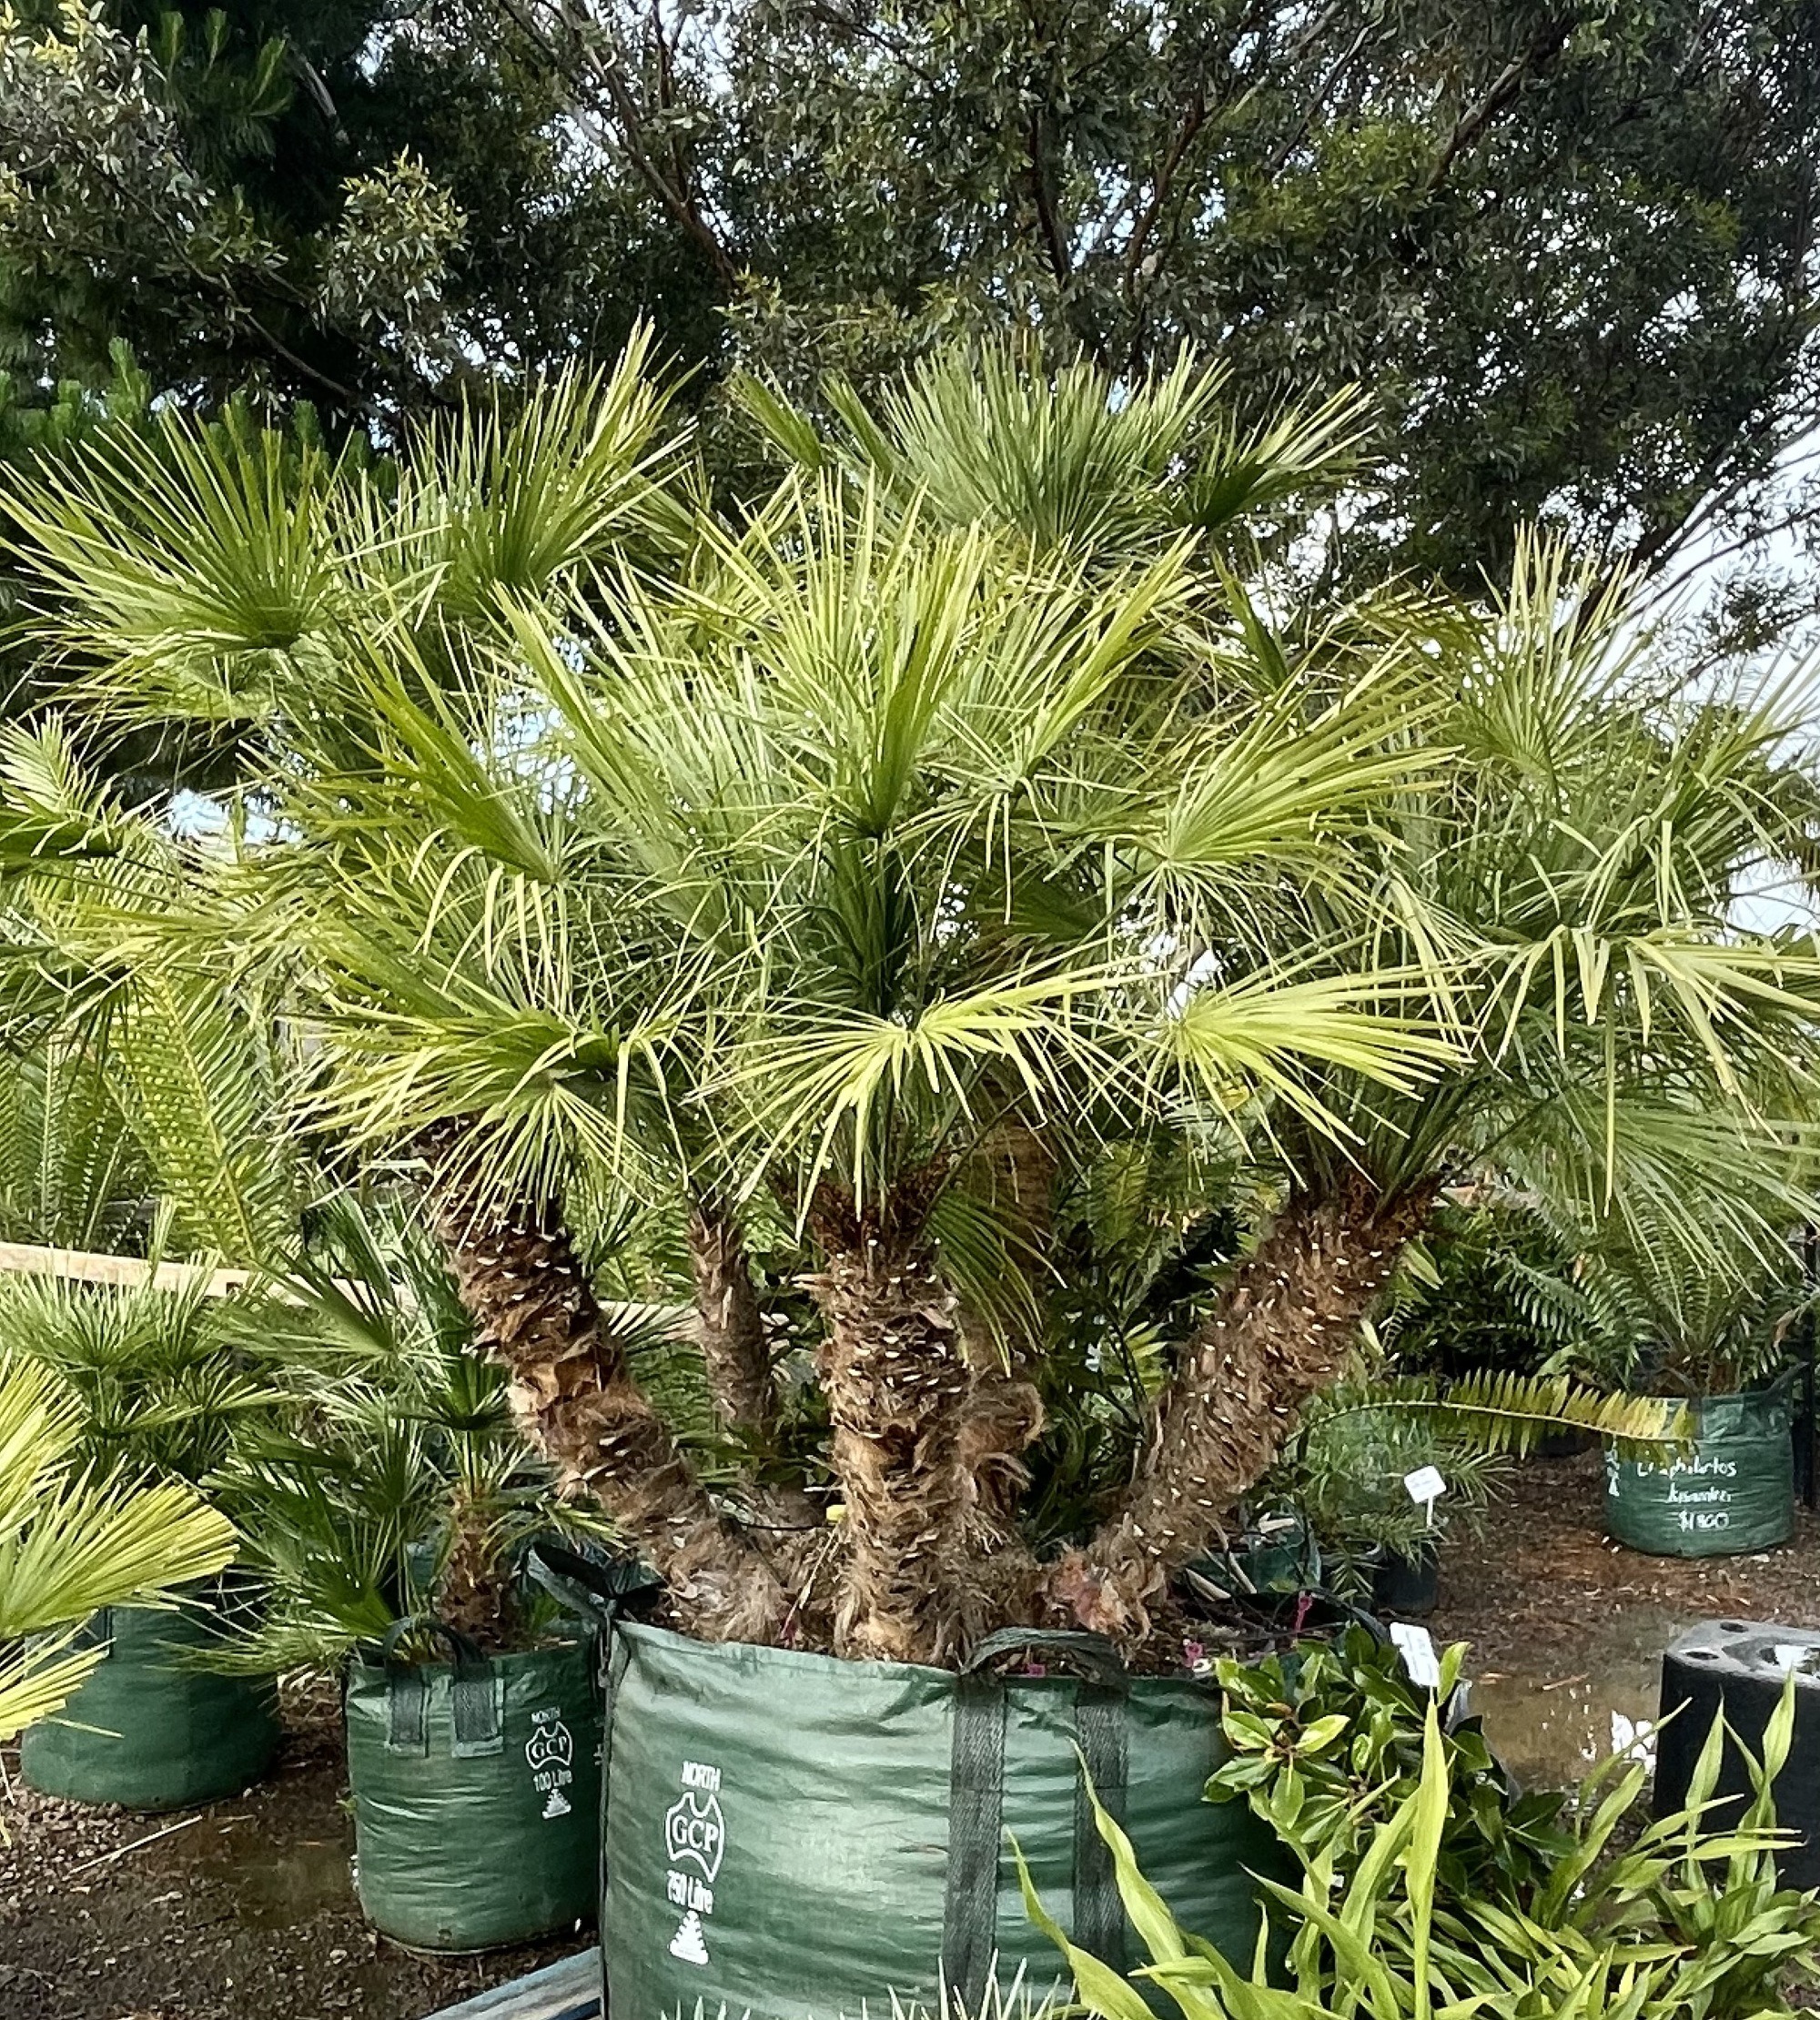 European Fan Palm Guide: How To Grow Care For “Chamaerops, 48% OFF